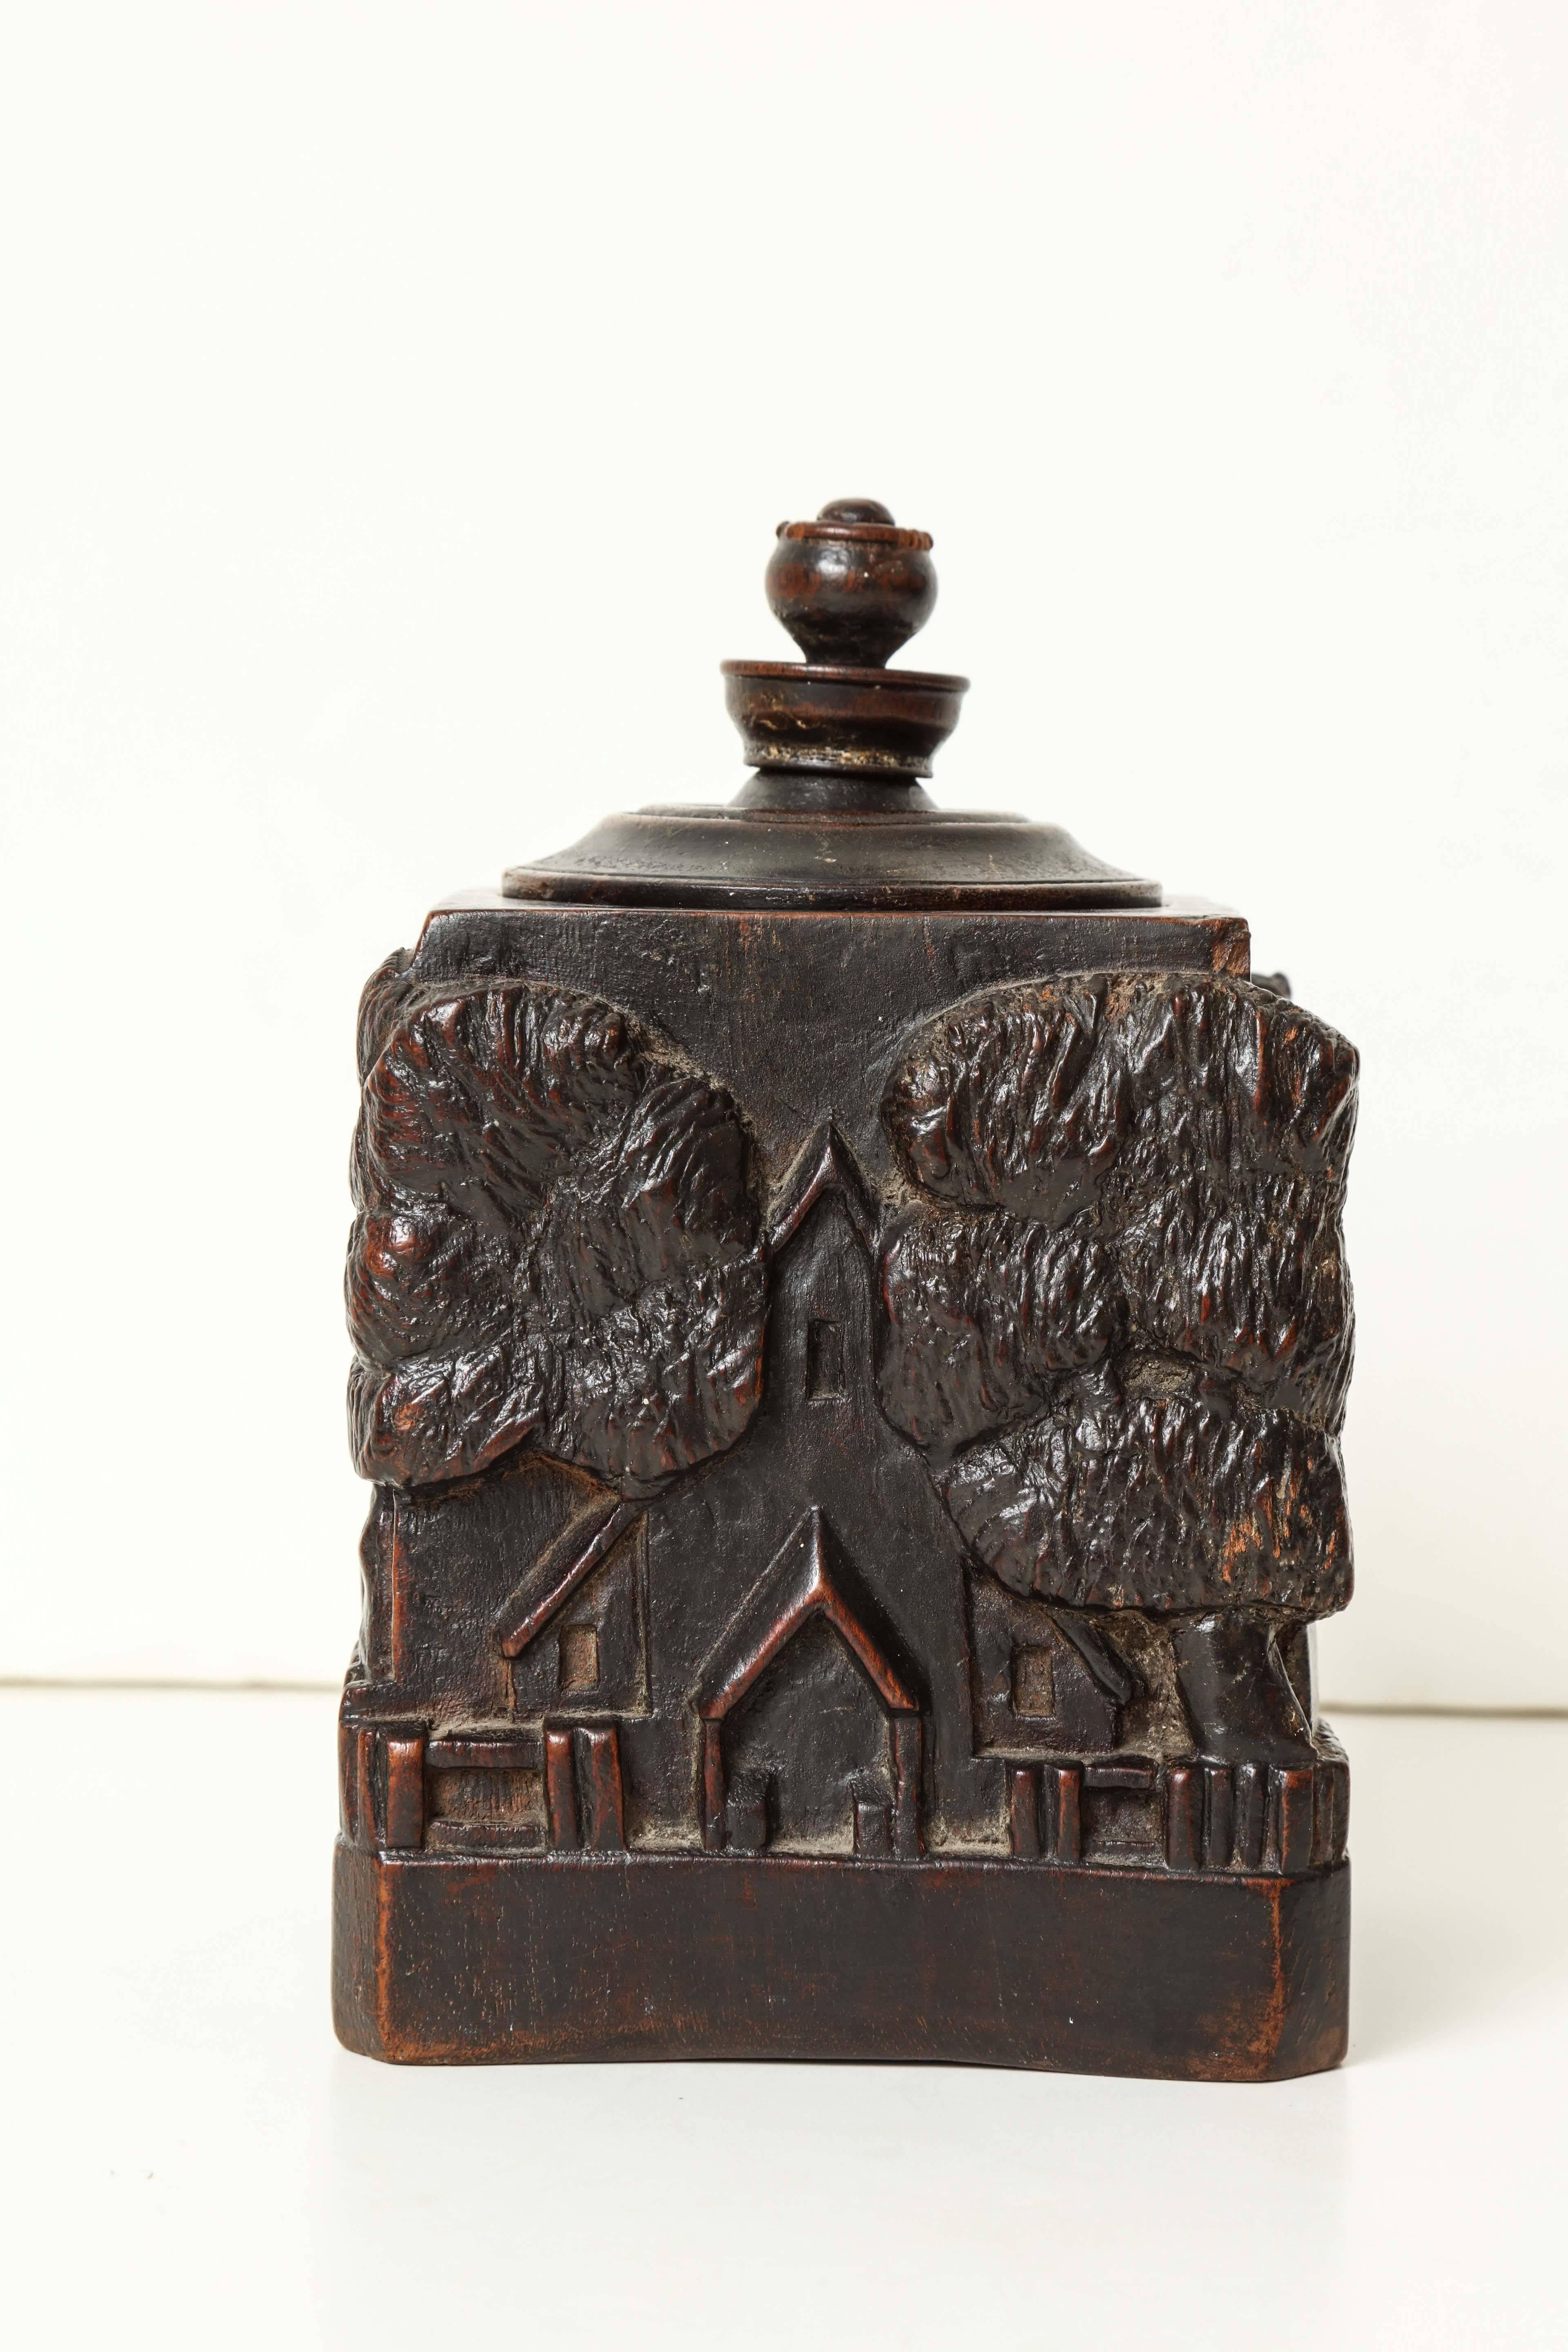 An unusual 18th century stained walnut tobacco jar
carved in relief with a castle, church, cottages and trees in high relief
with a turned lid
possibly Irish, circa 1750.
 